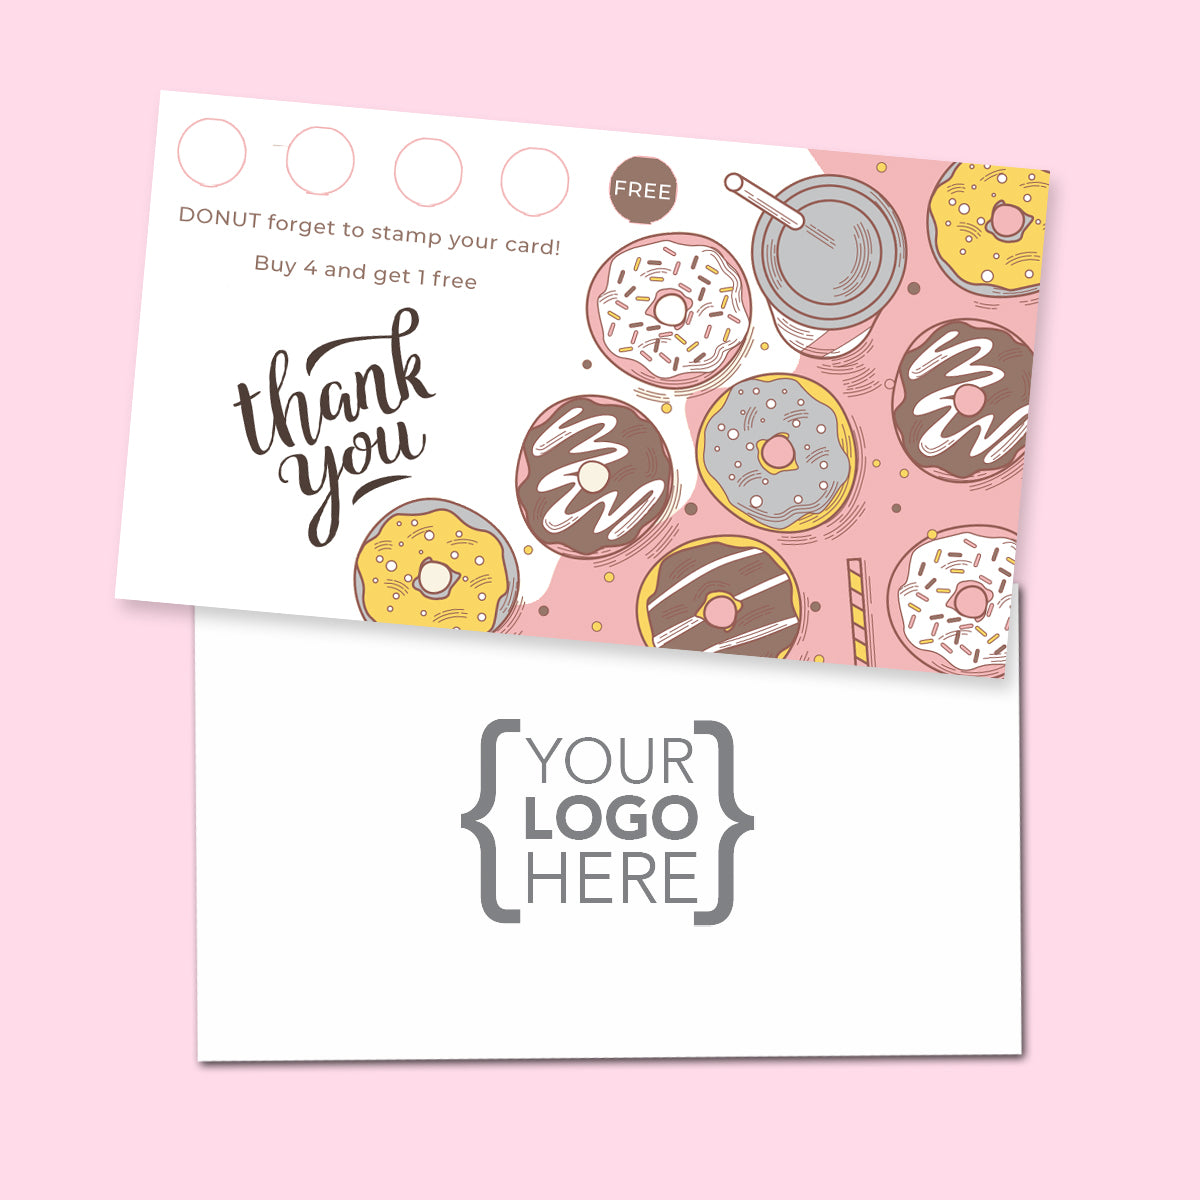 10% Sale Donuts & Sweets Stamp Card